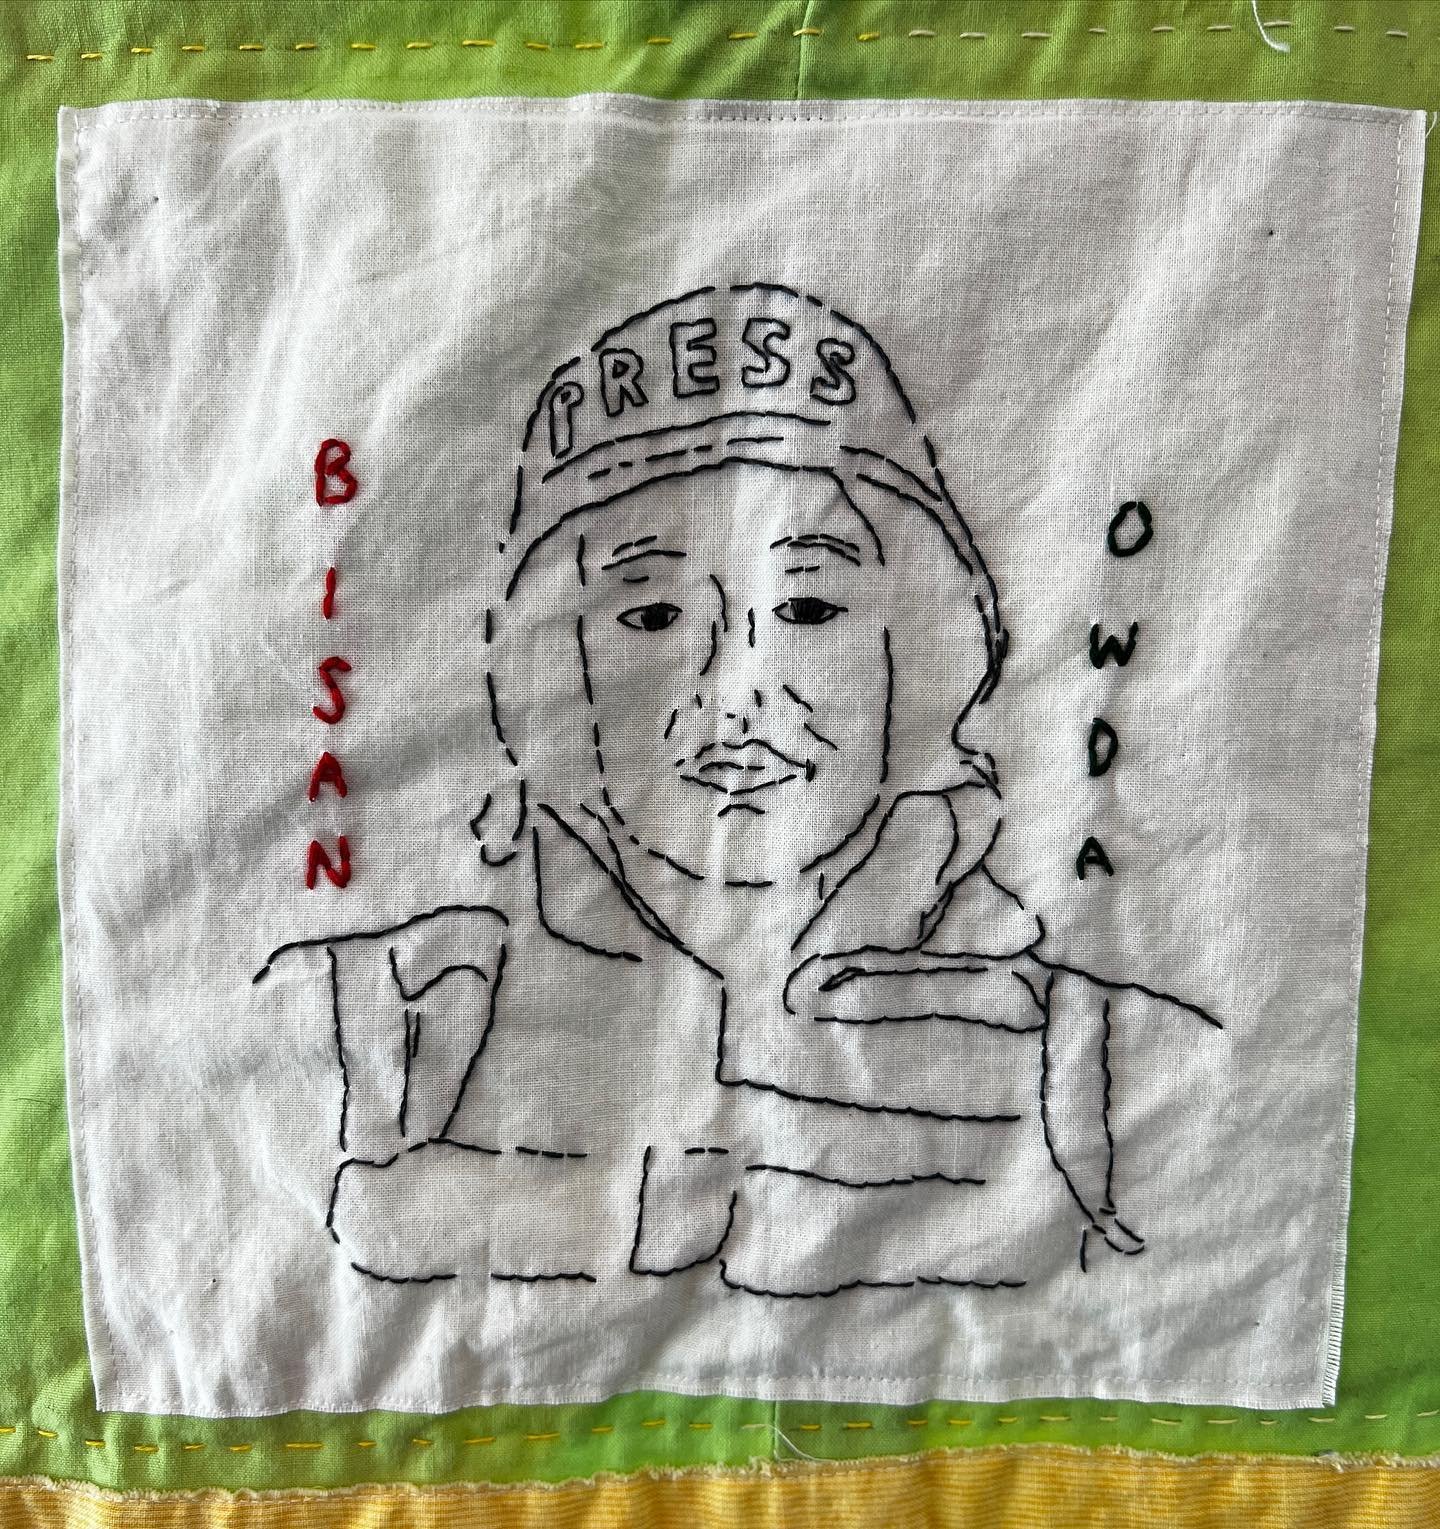 An embroidered portrait of @wizard_bisan1 I made for the Strong Women quilt #FreePalestine 🇵🇸🍉

#CraftingChange #CommunityArtTherapy #ArtTherapy #Quilts #Craft #CraftActivism #Craftivism 

ID: a photo of a quilt, focused on a white square with an 